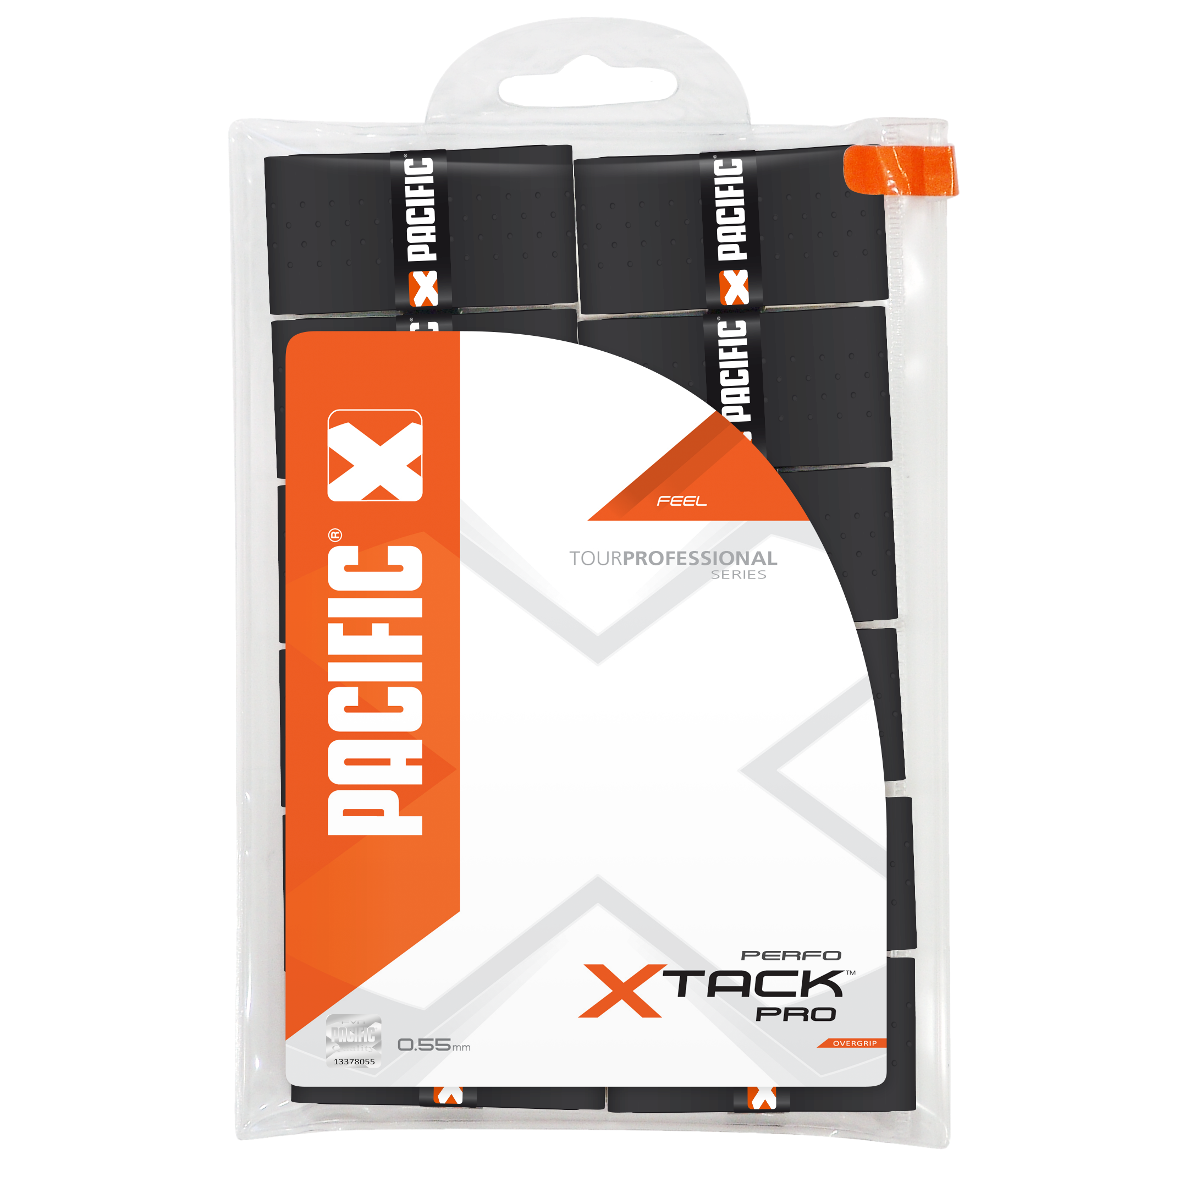 PACIFIC X Tack PRO Perfo – 12er Pack black